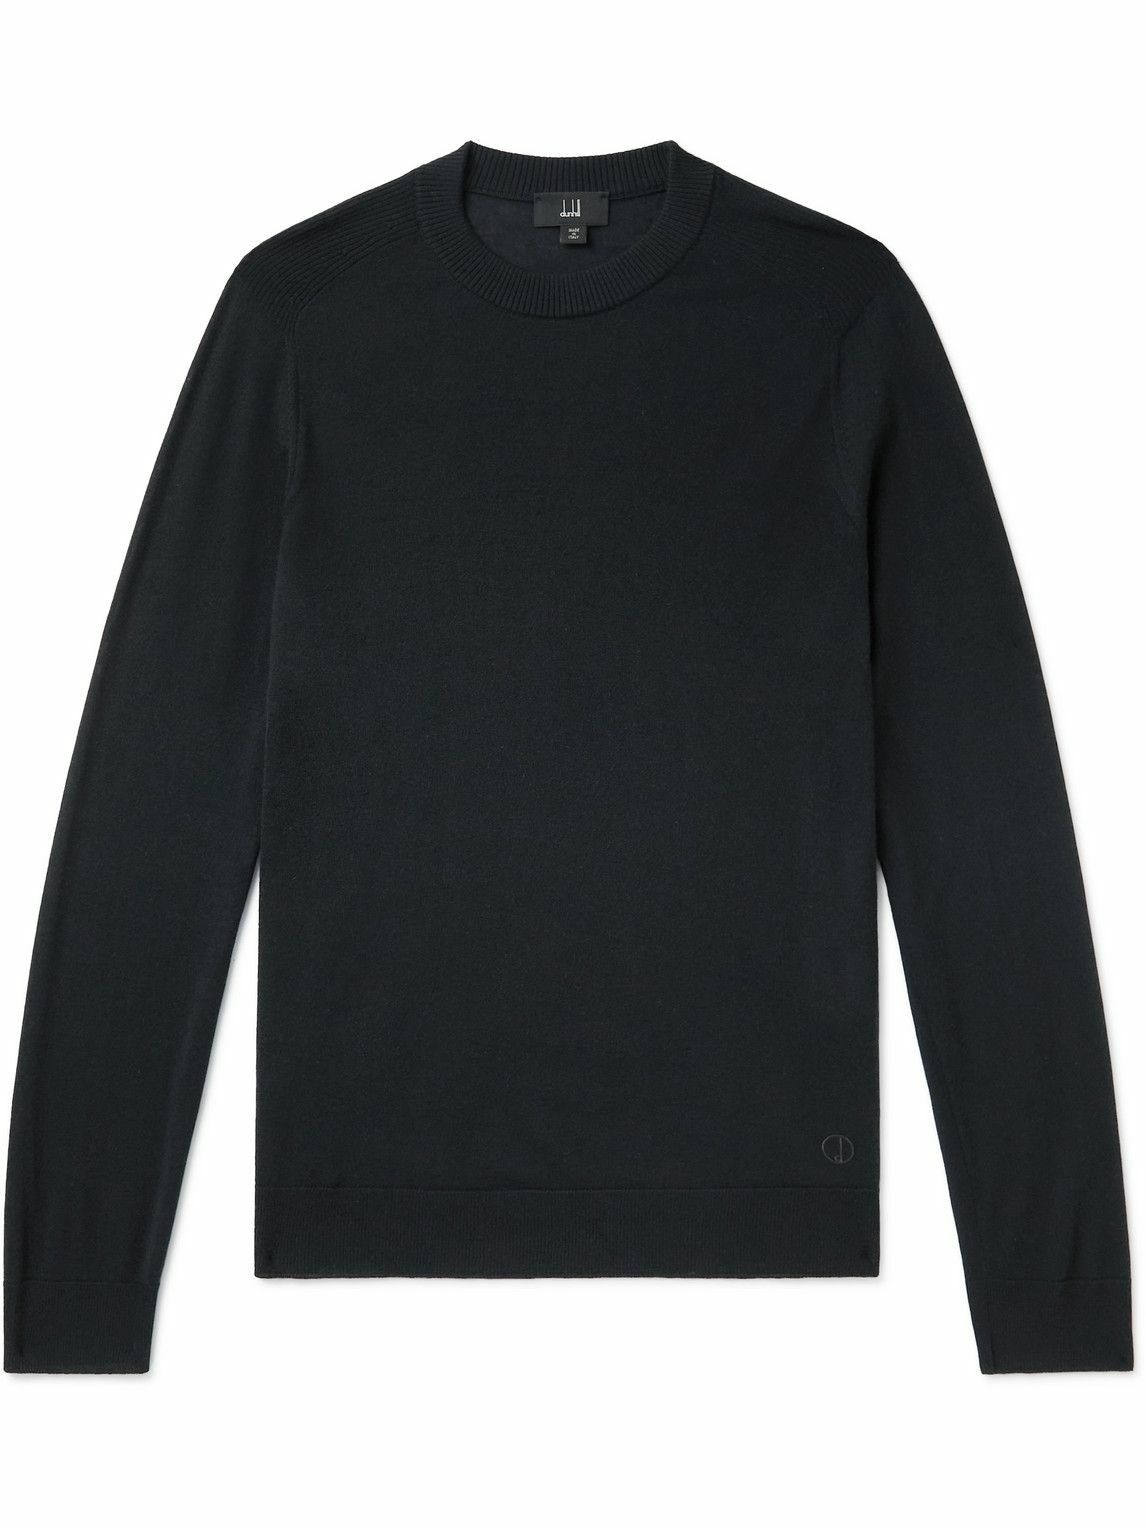 Dunhill - Cashmere Sweater - Black Dunhill